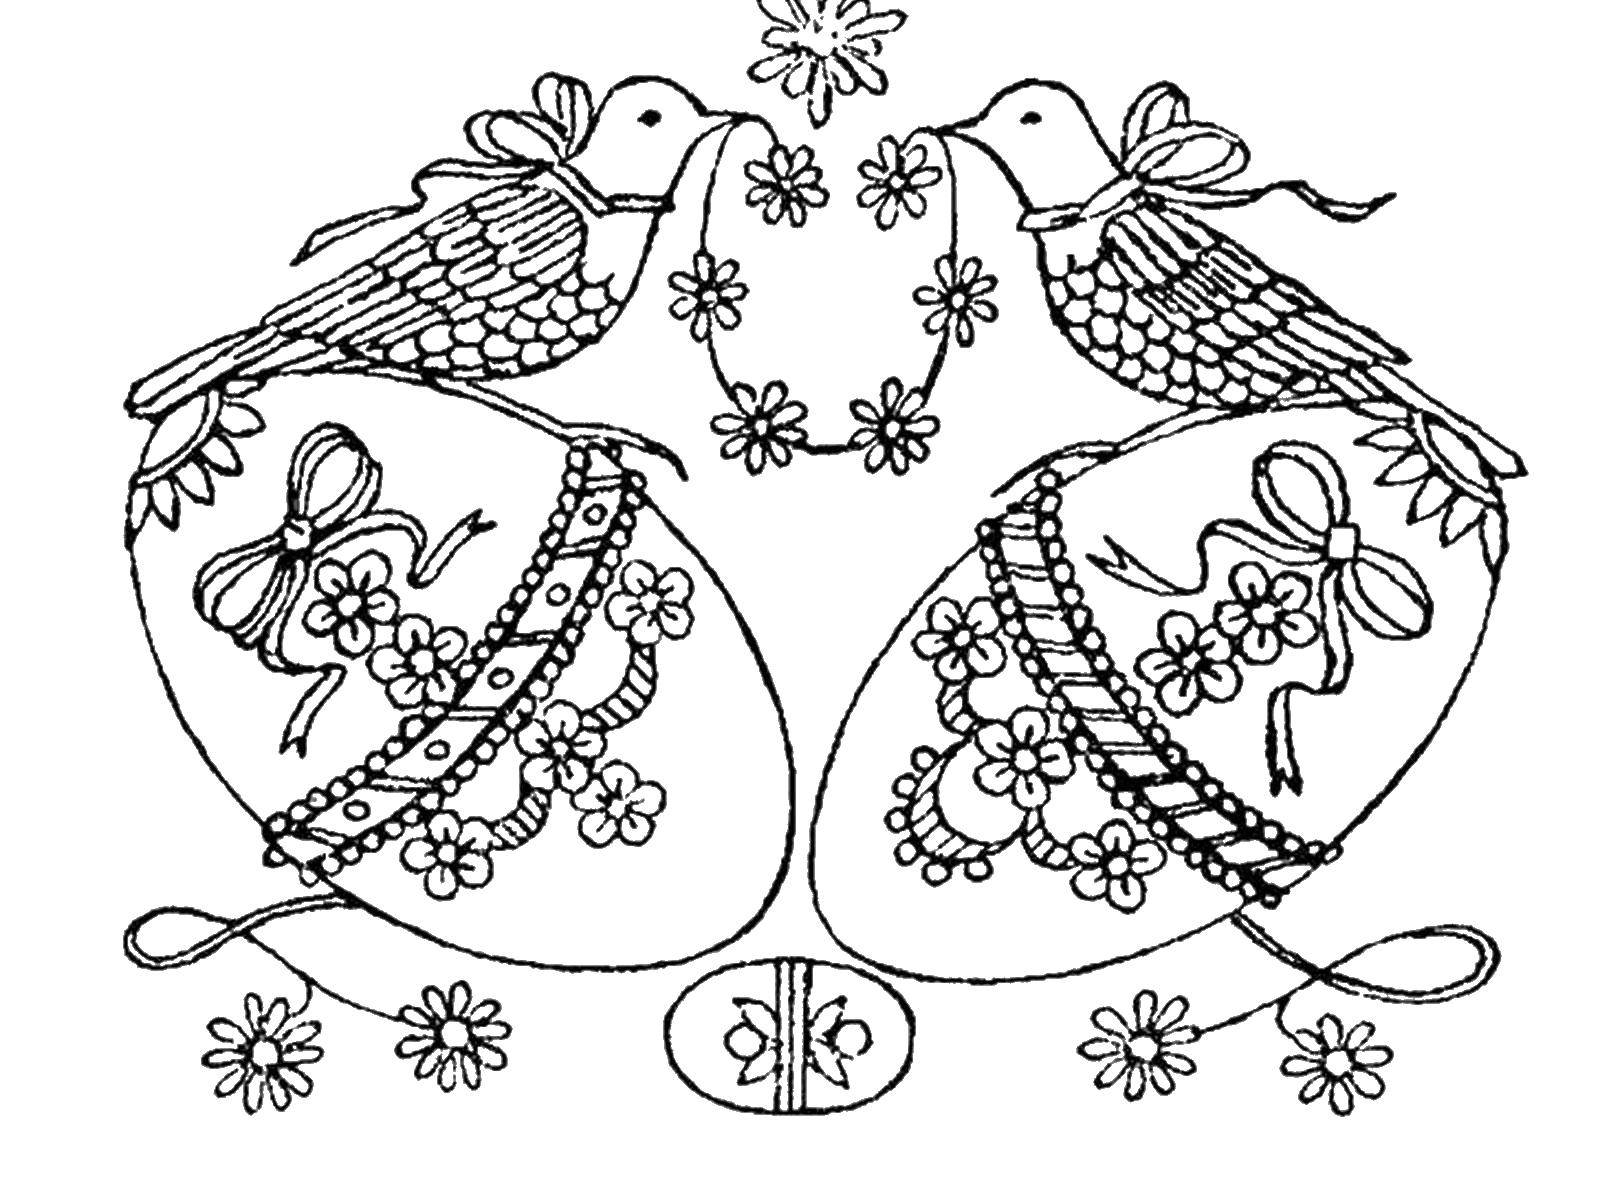 Coloring Birds on the Easter eggs. Category coloring Easter. Tags:  Easter, eggs, poultry.